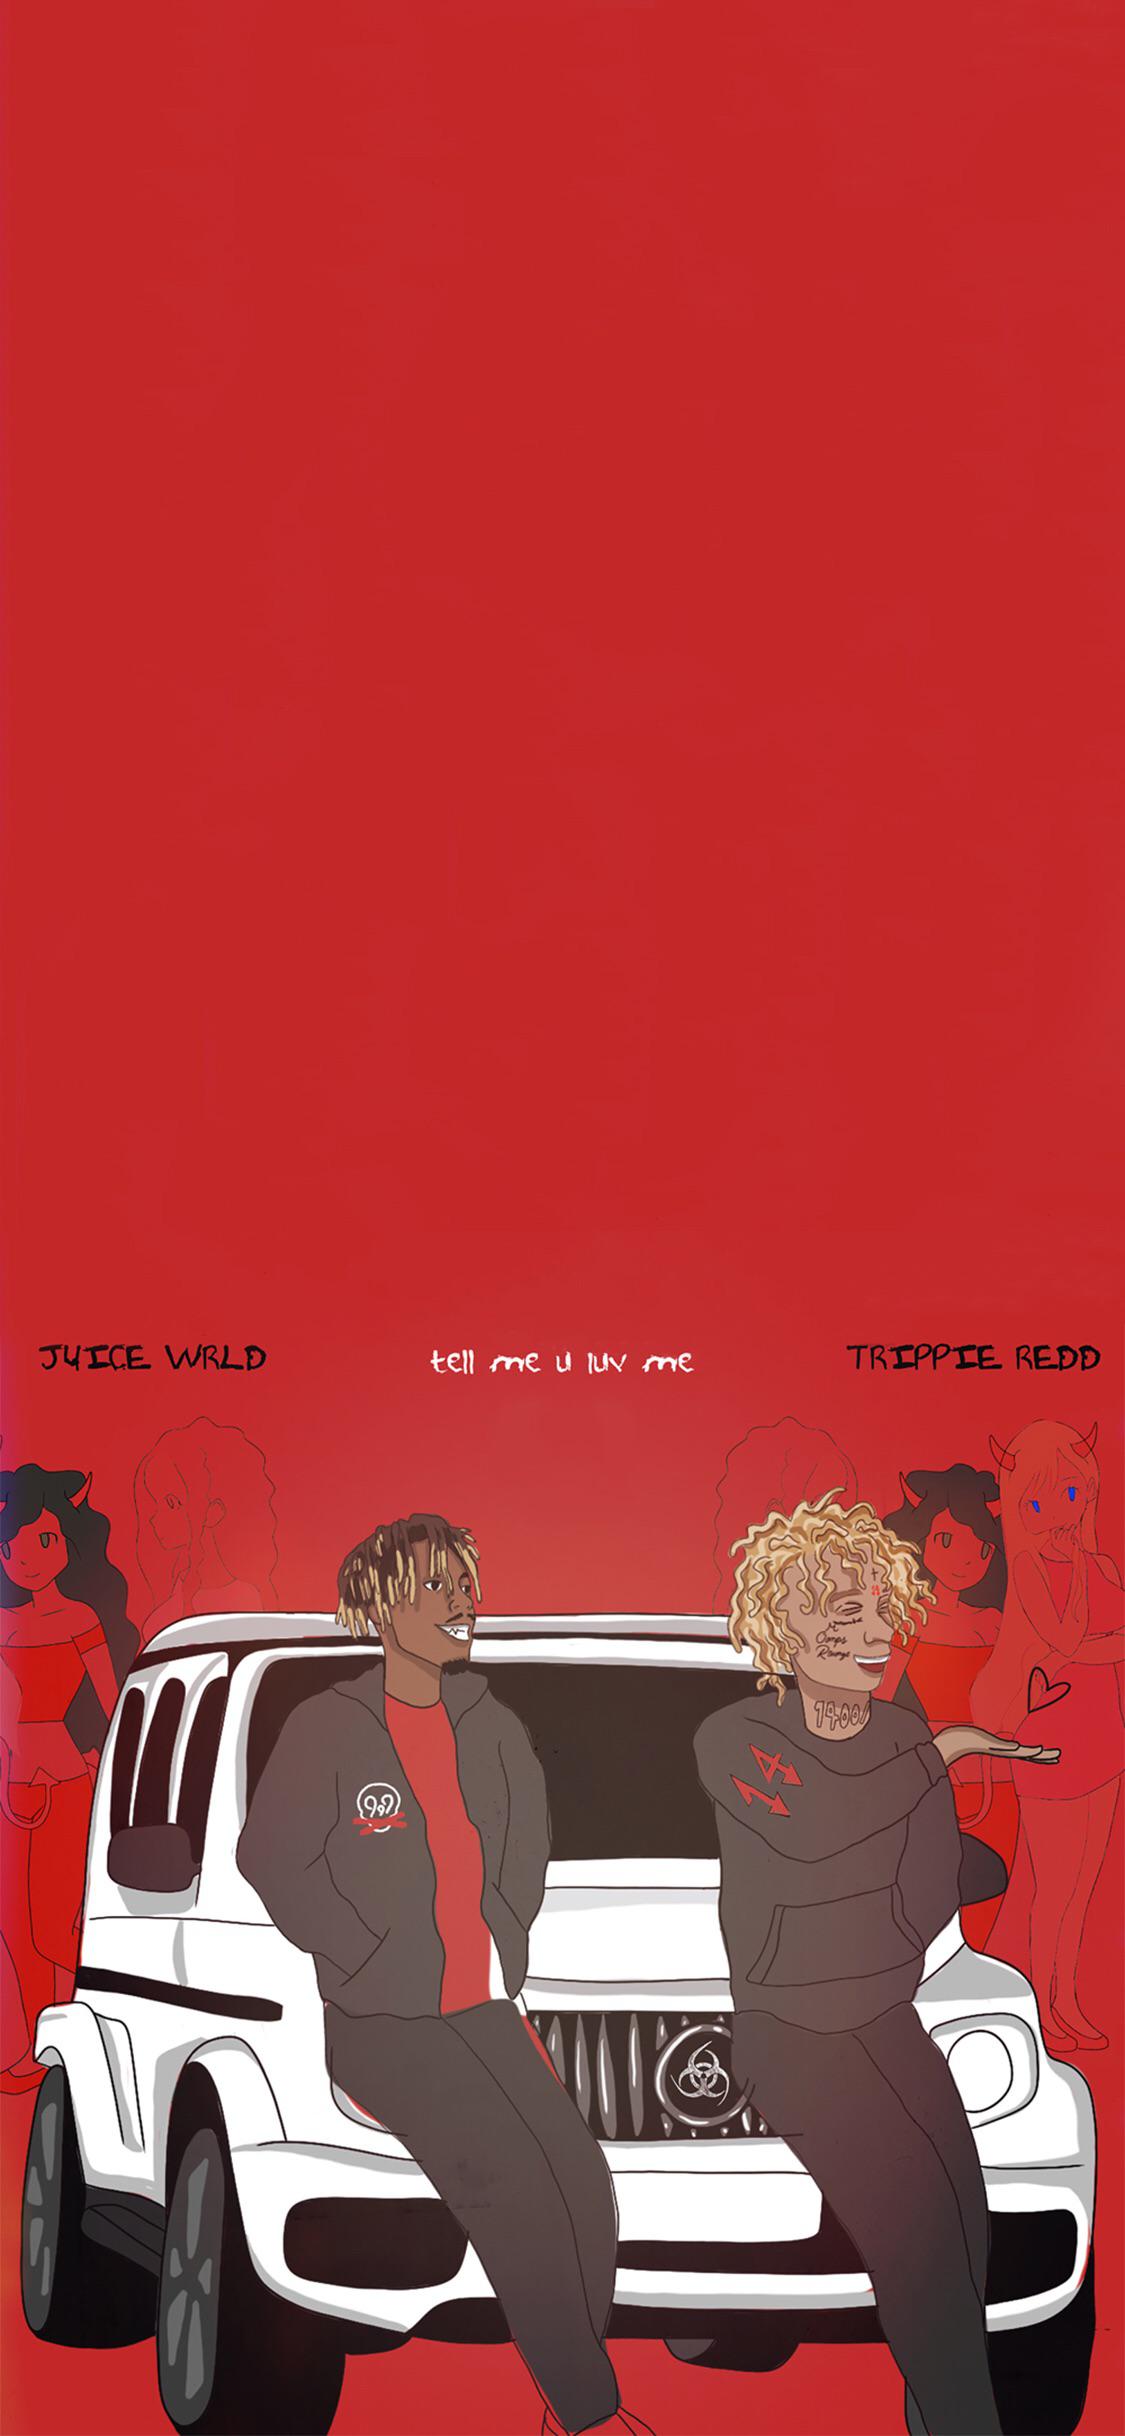 Trippie Redd And Juice Wrld Wallpapers Wallpaper Cave Want to discover art related to trippieredd? trippie redd and juice wrld wallpapers